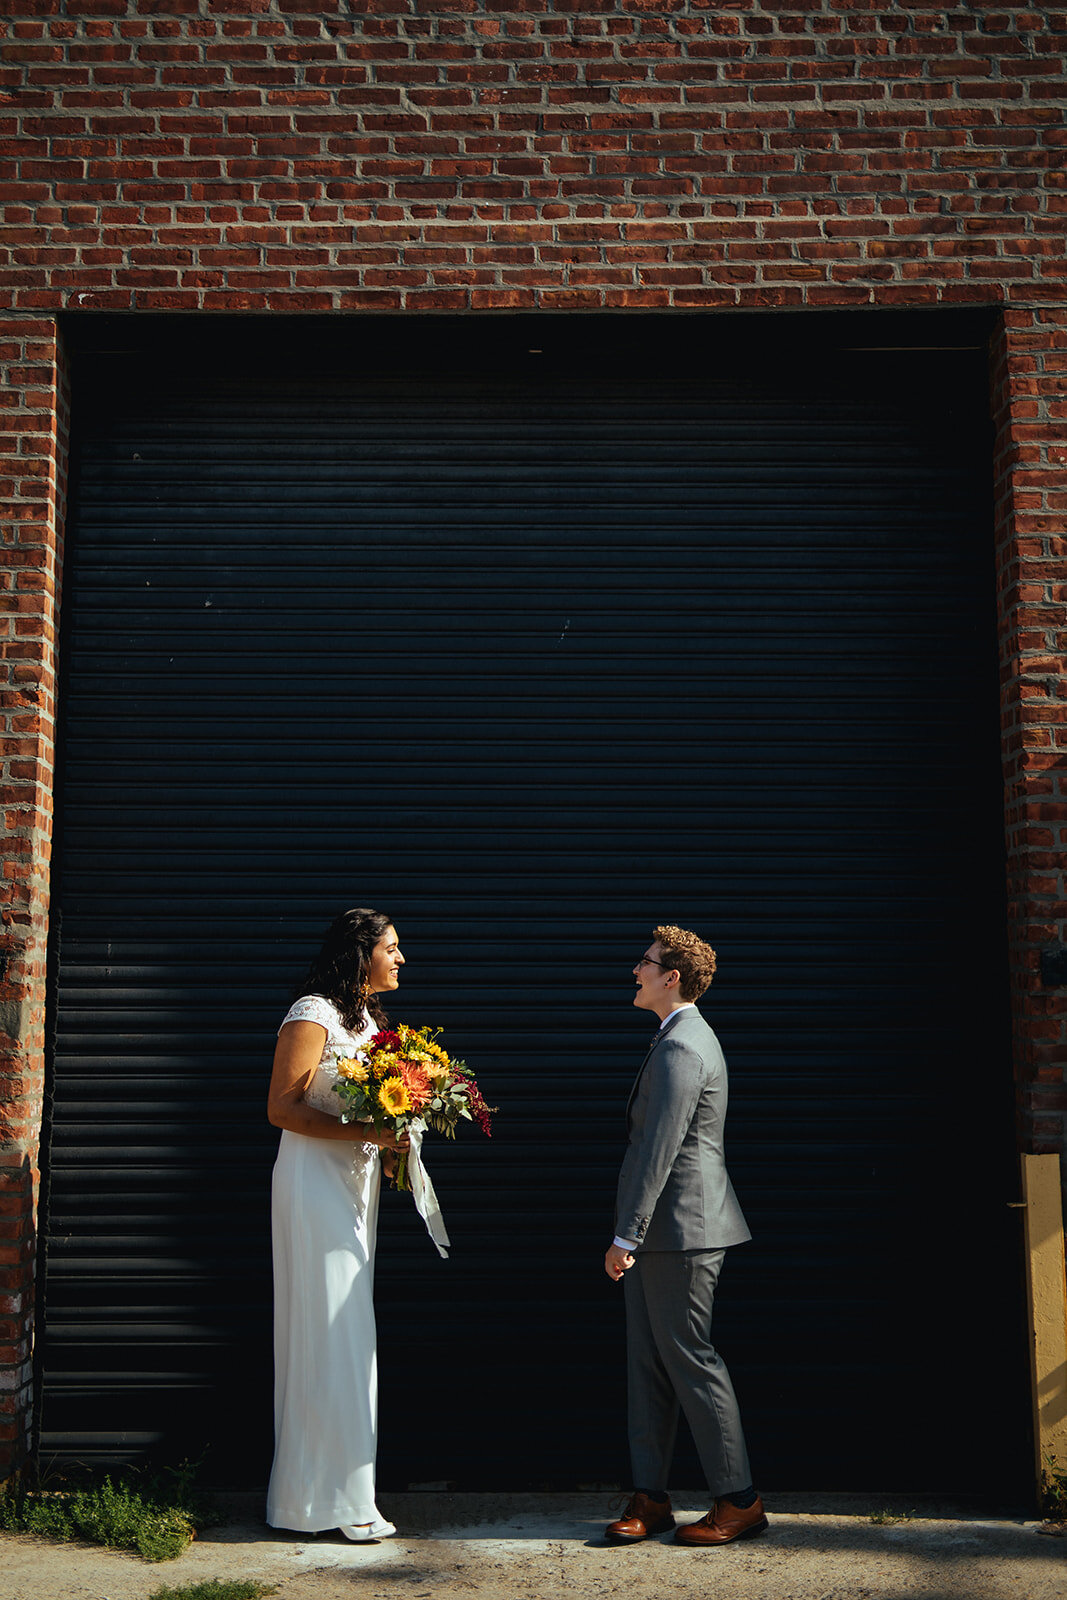 Queer couple having their first look before marrying in Brooklyn NYC Shawnee Custalow Queer Wedding Photographer